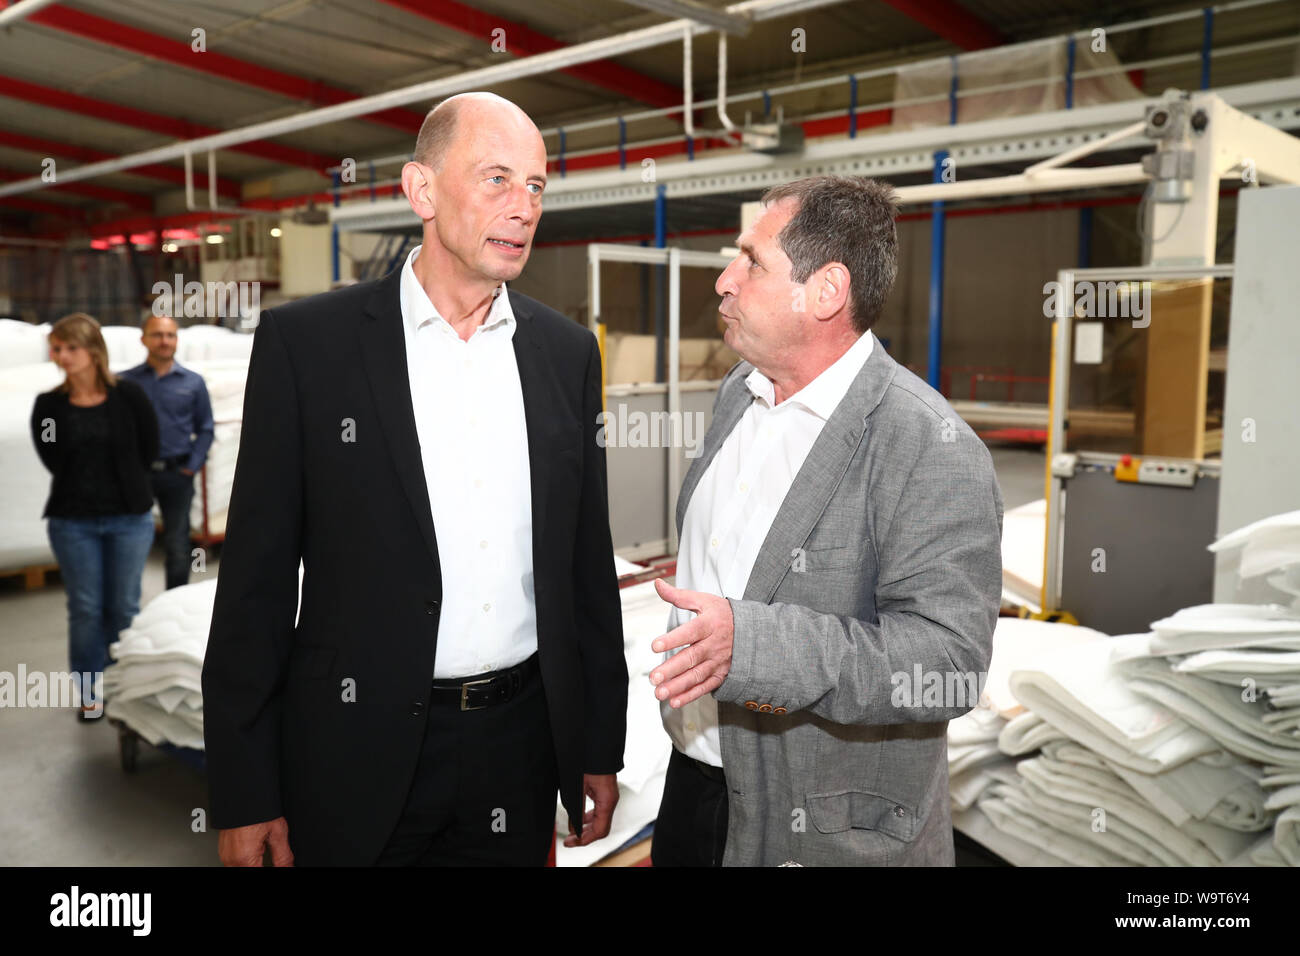 Weida, Germany. 15th Aug, 2019. Wolfgang Tiefensee (SPD, l), Thuringia's  Minister of Economic Affairs, visits the Breckle mattress plant and is  accompanied by Gerd Breckle, Managing Director of Breckle Matratzenwerk  Weida GmbH.